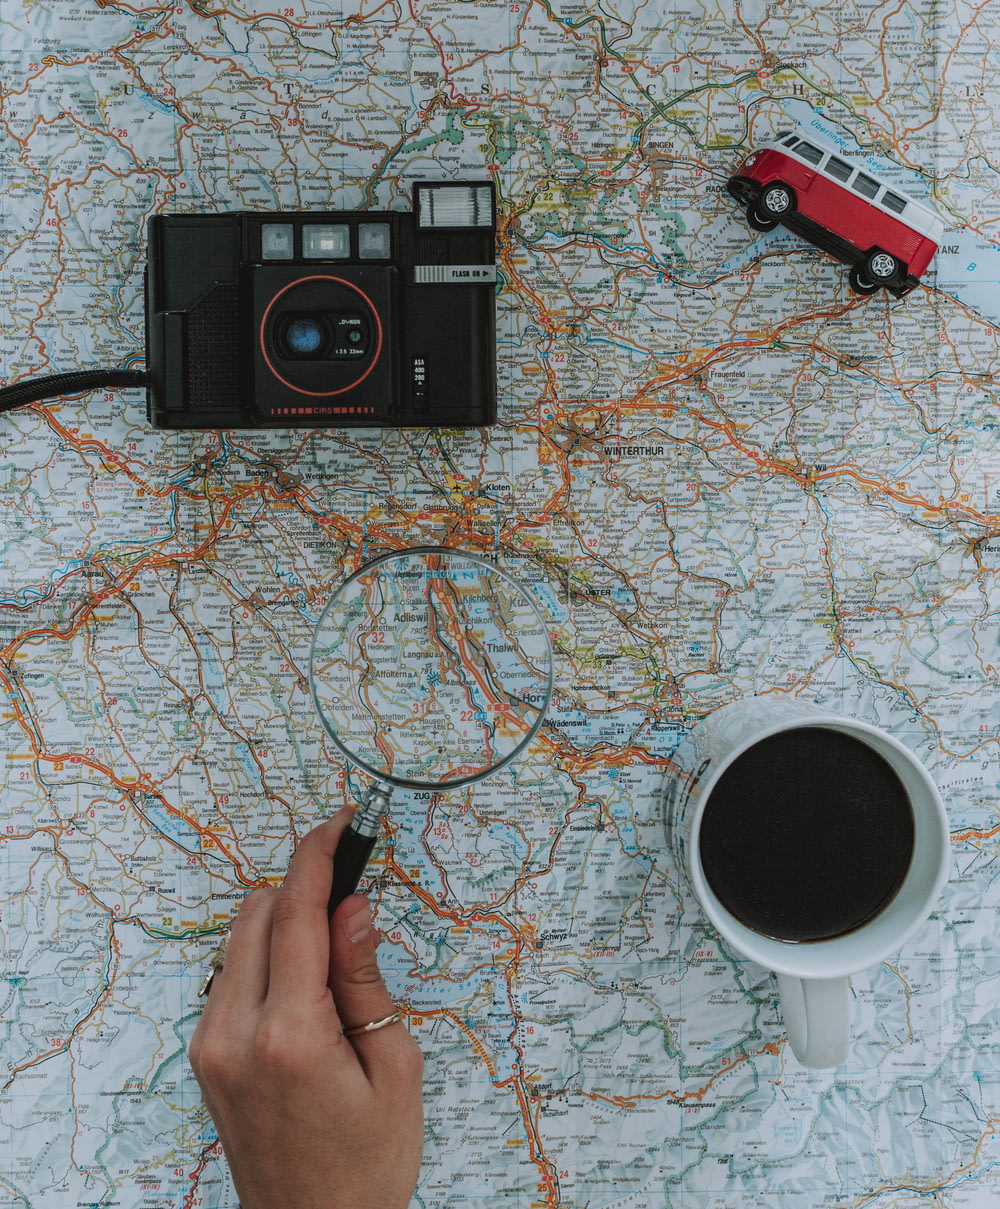 person holding magnifying glass beside black film camera white ceramic mug filled with black liquid near vehicle toy scale model